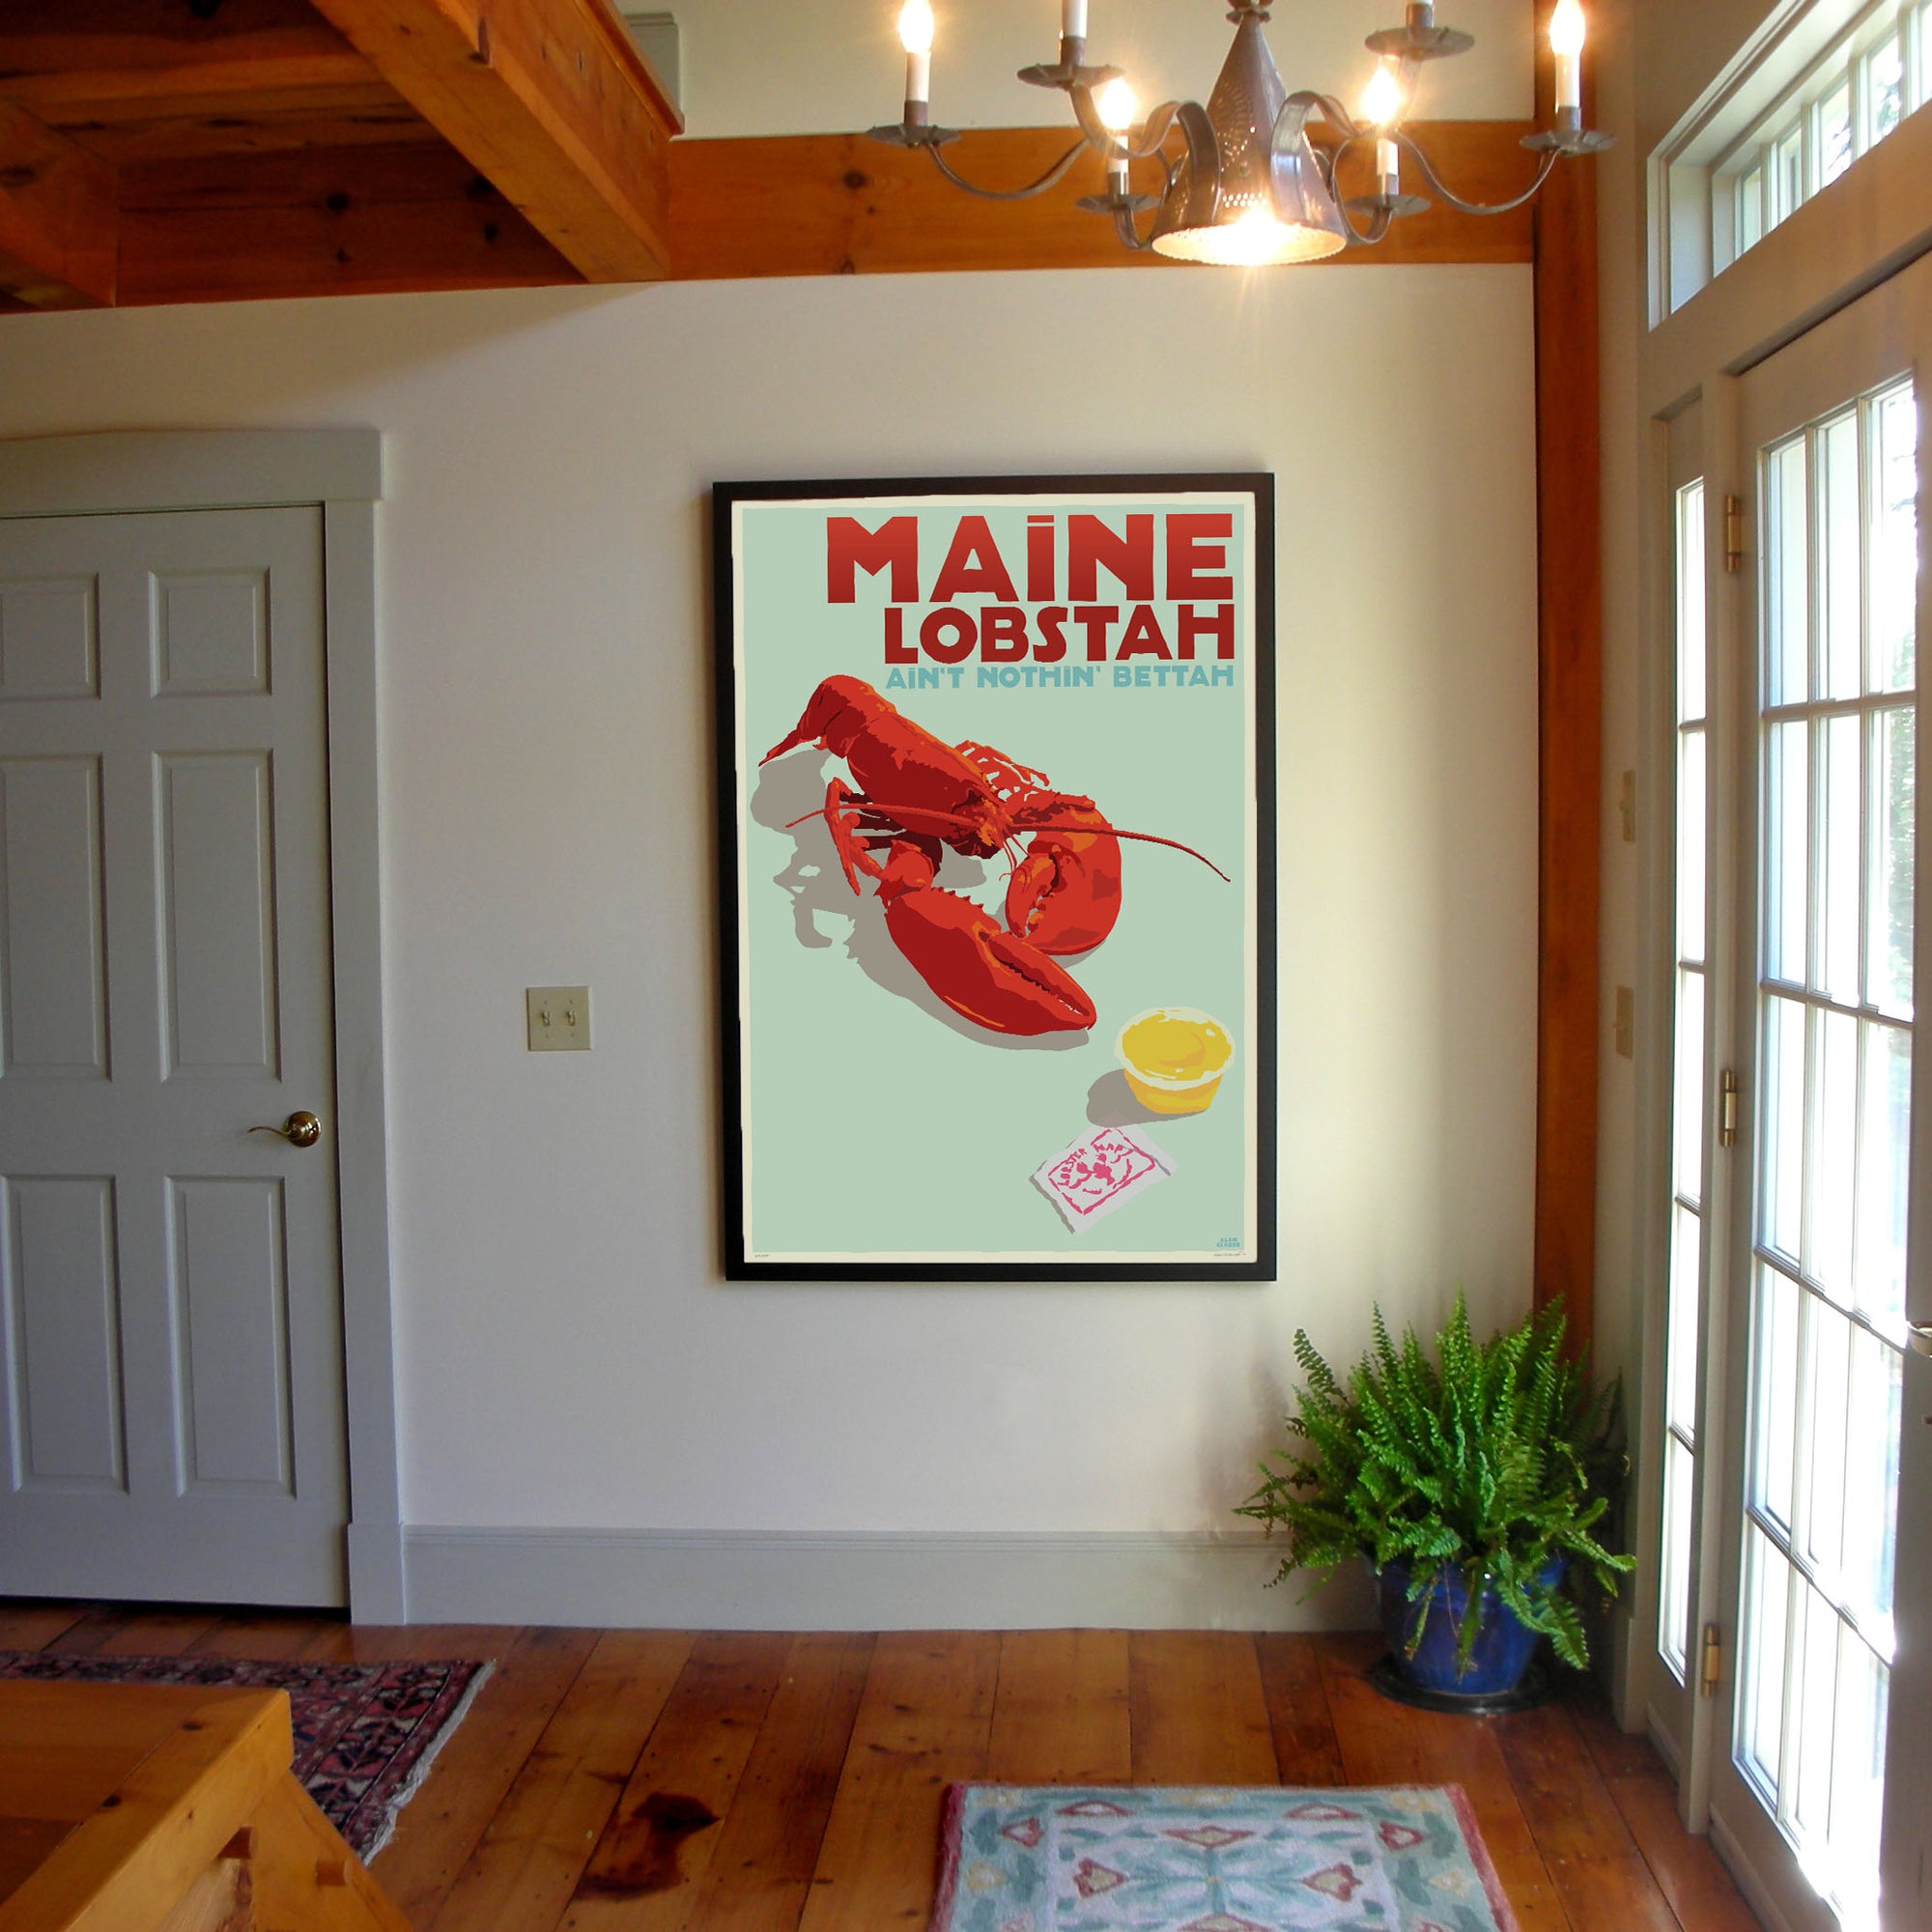 Maine Lobstah With Butter Art Print 36" x 53" Framed Wall Poster By Alan Claude - Maine